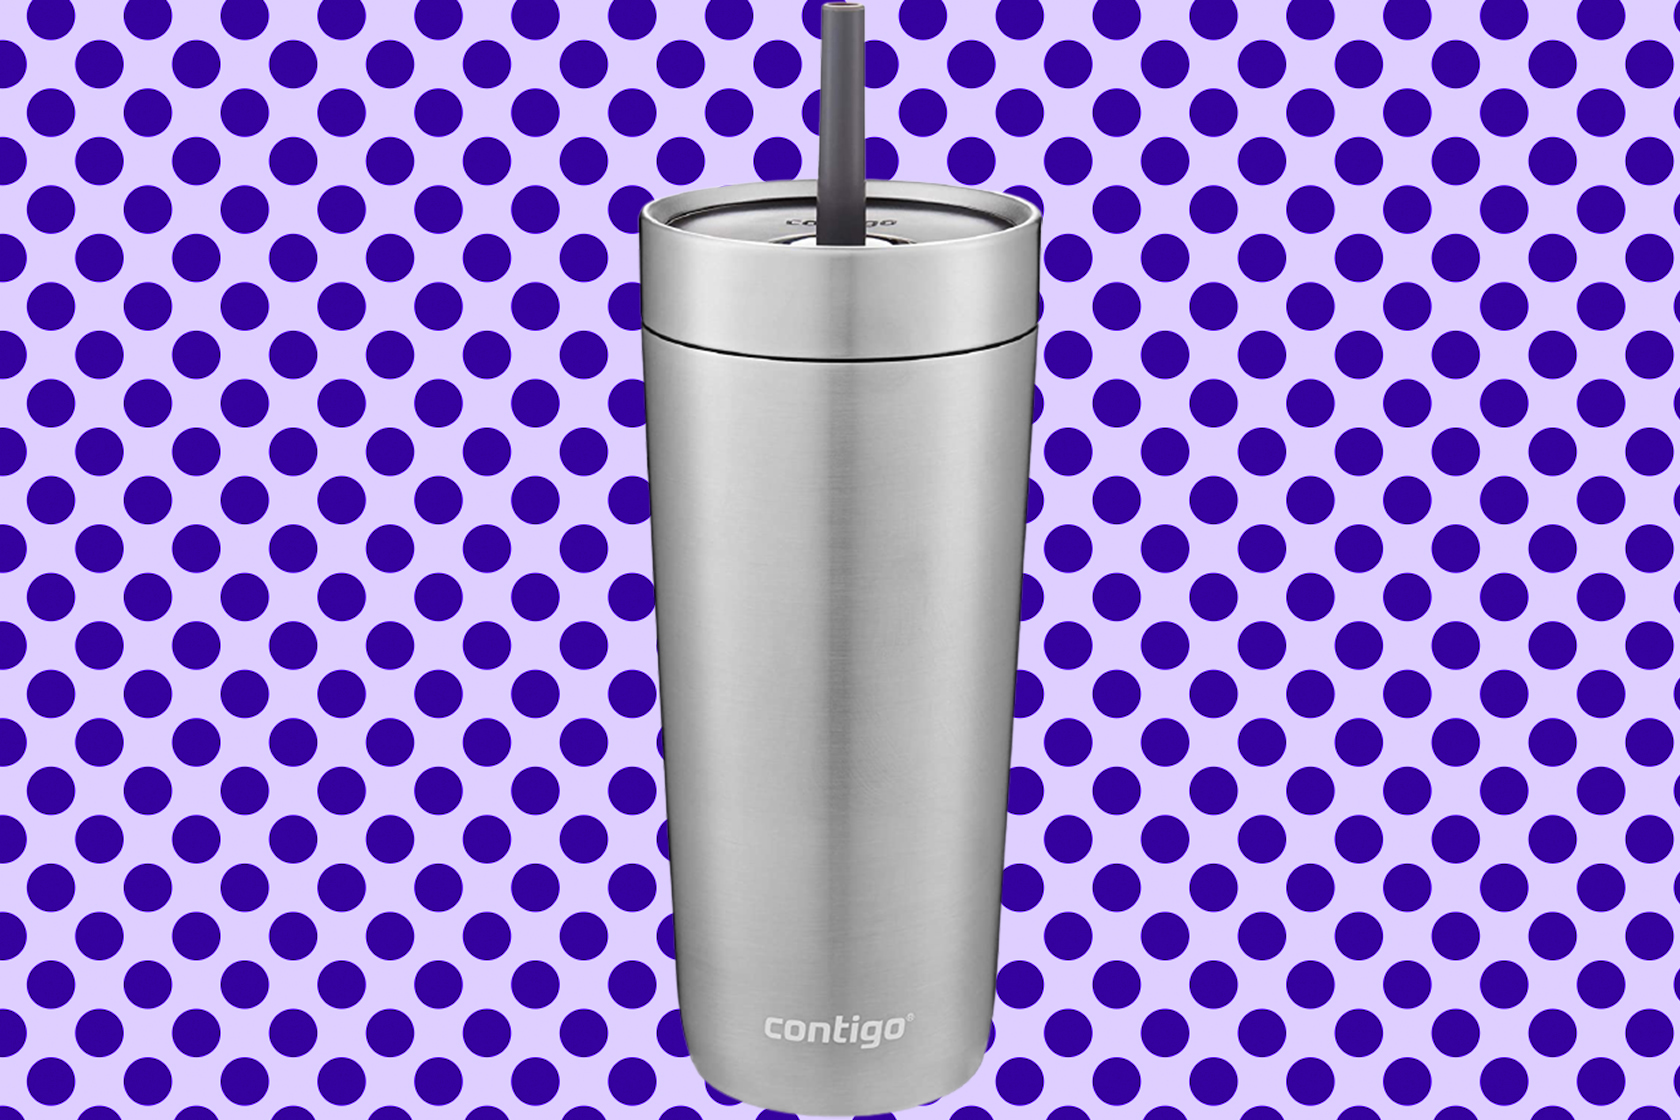 Contigo Luxe Insulated Stainless Steel Travel Tumbler with Spill-Proof Lid